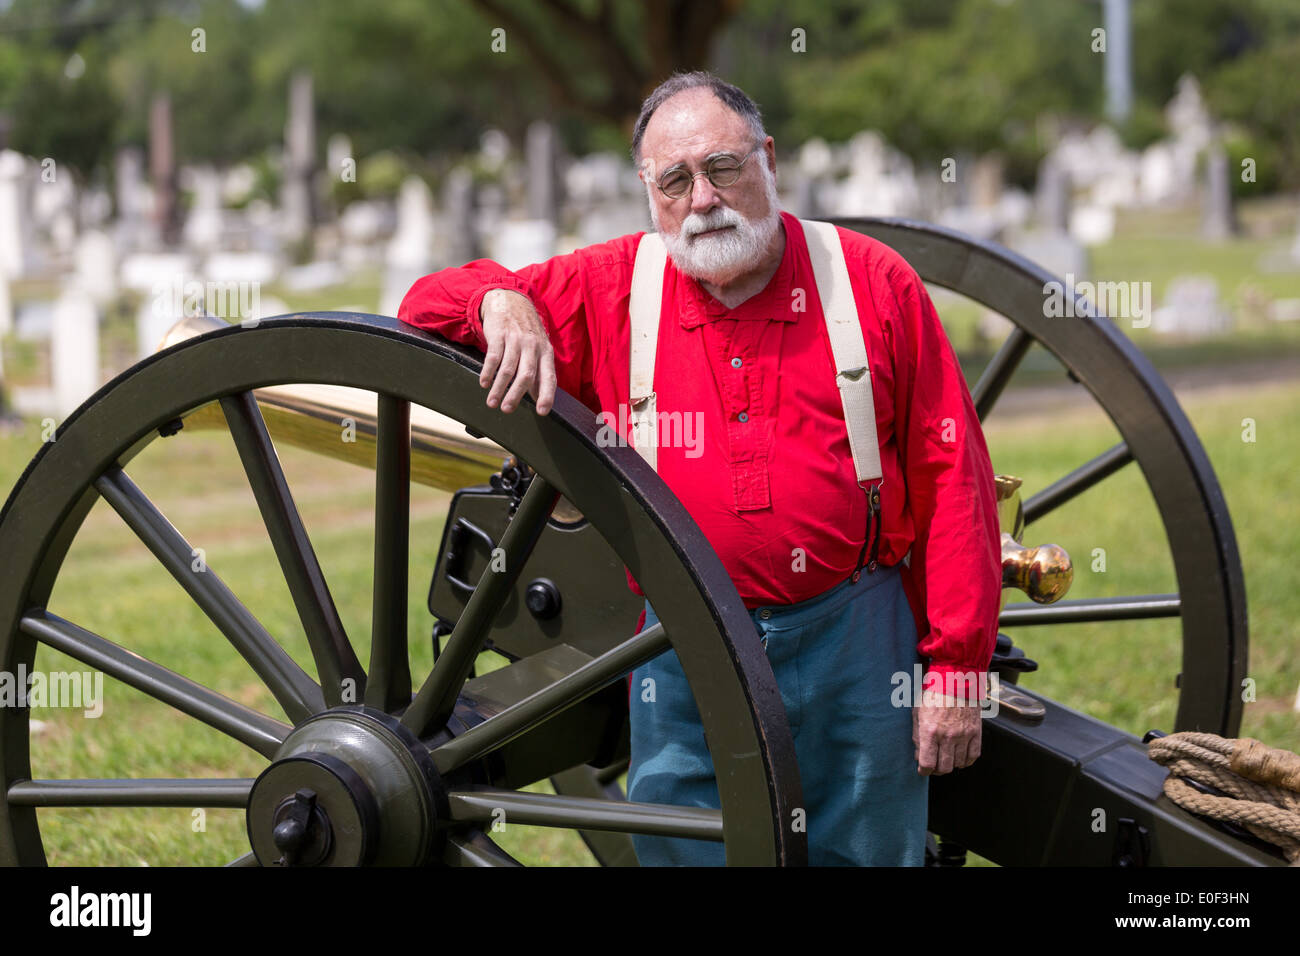 A Civil War re-enactor poses with a cannon during Confederate Memorial Day at Magnolia Cemetery April 10, 2014 in Charleston, SC. Stock Photo